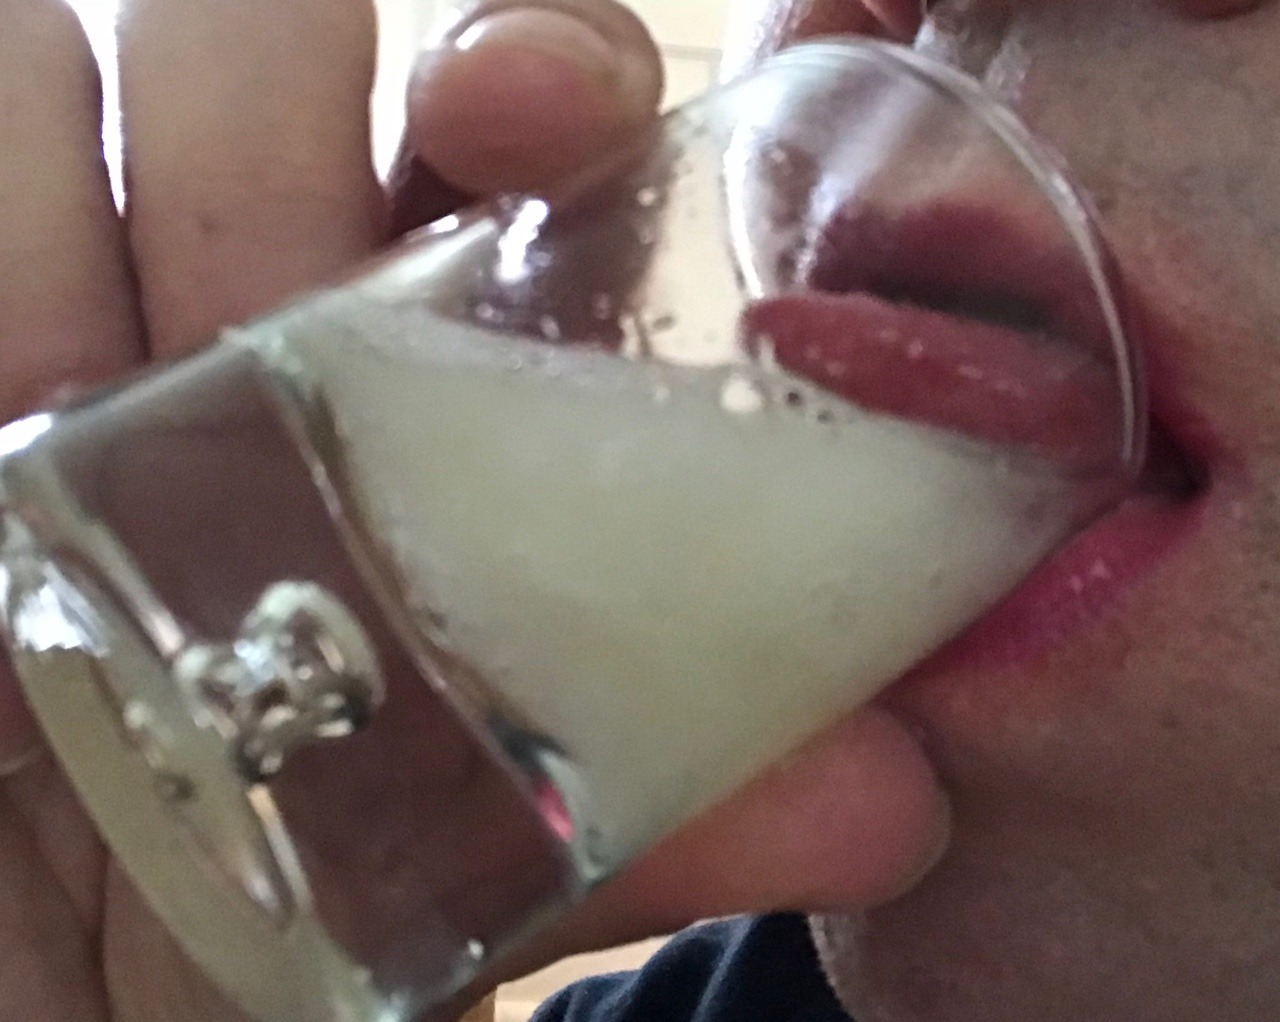 drinkcumloads: Warming the cum up a little and playing around. I have it all videoed,